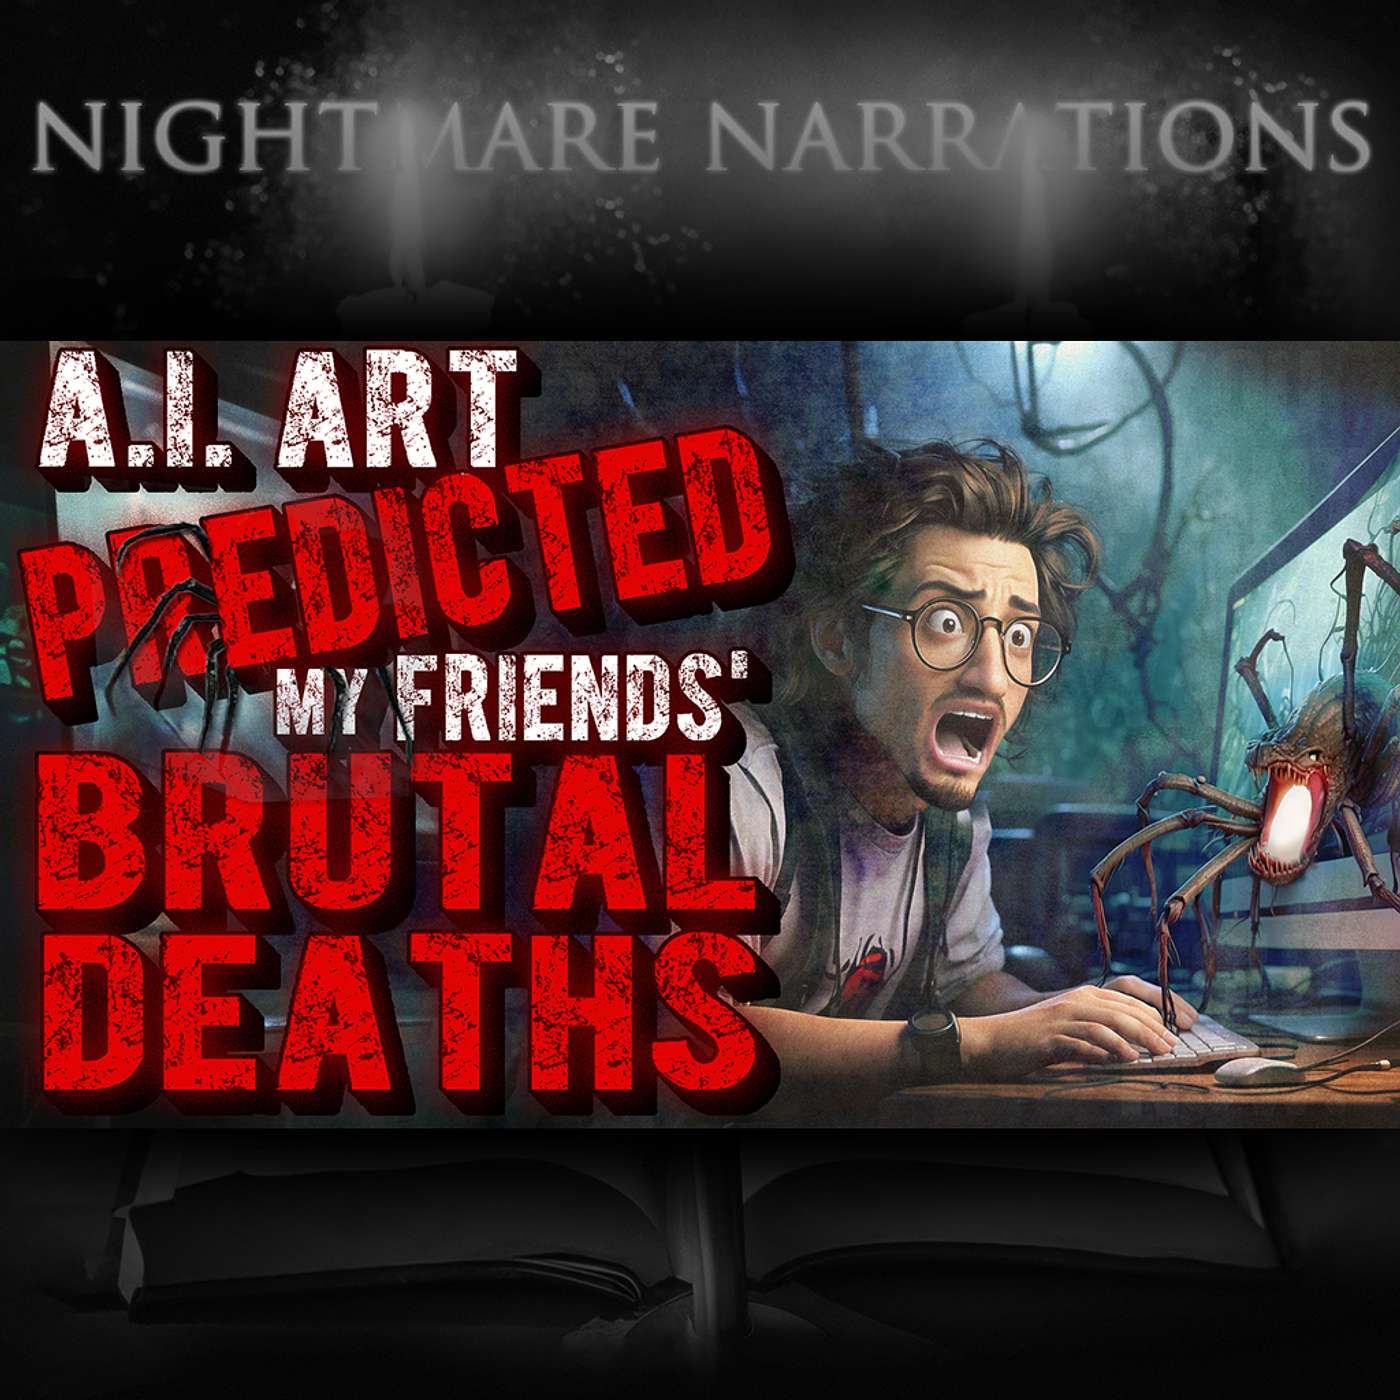 Chilling: AI Art Predicted My Friends' Brutal Deaths - Scary story - AI Predicts Horrifying Fates